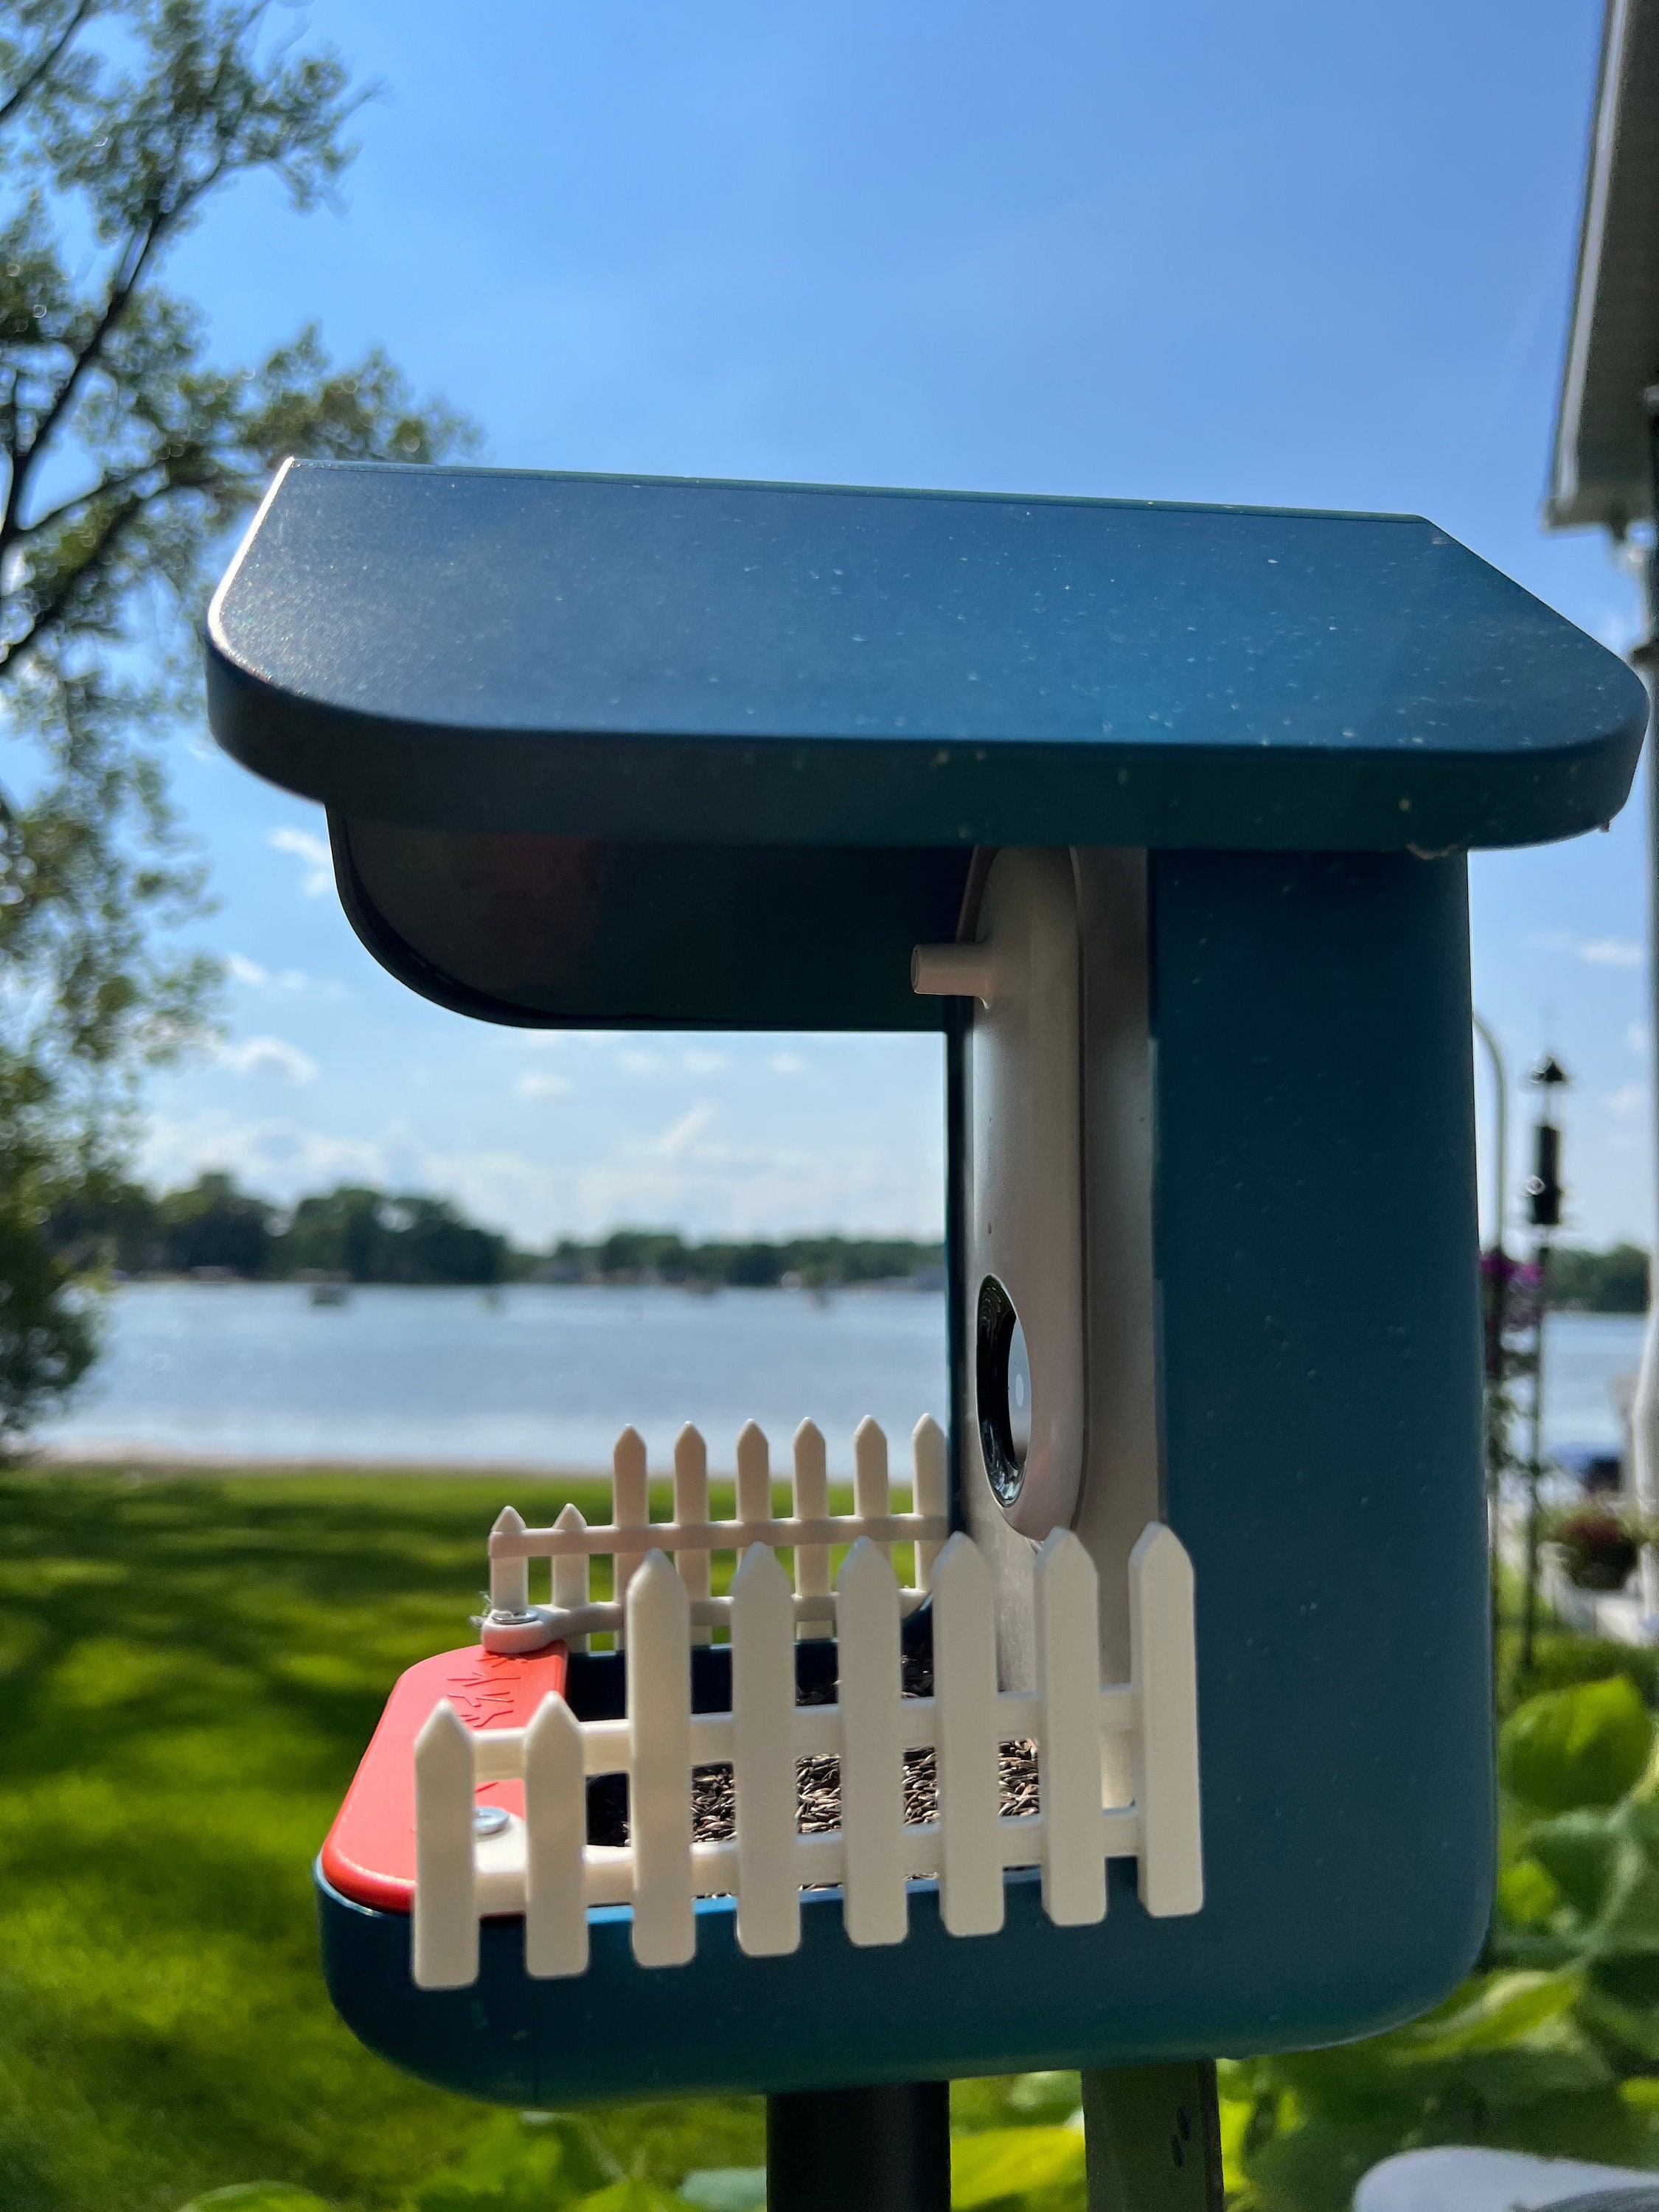 3D Printed Bird Buddy Perch & Picket Fence Modifications – Charming Terrain